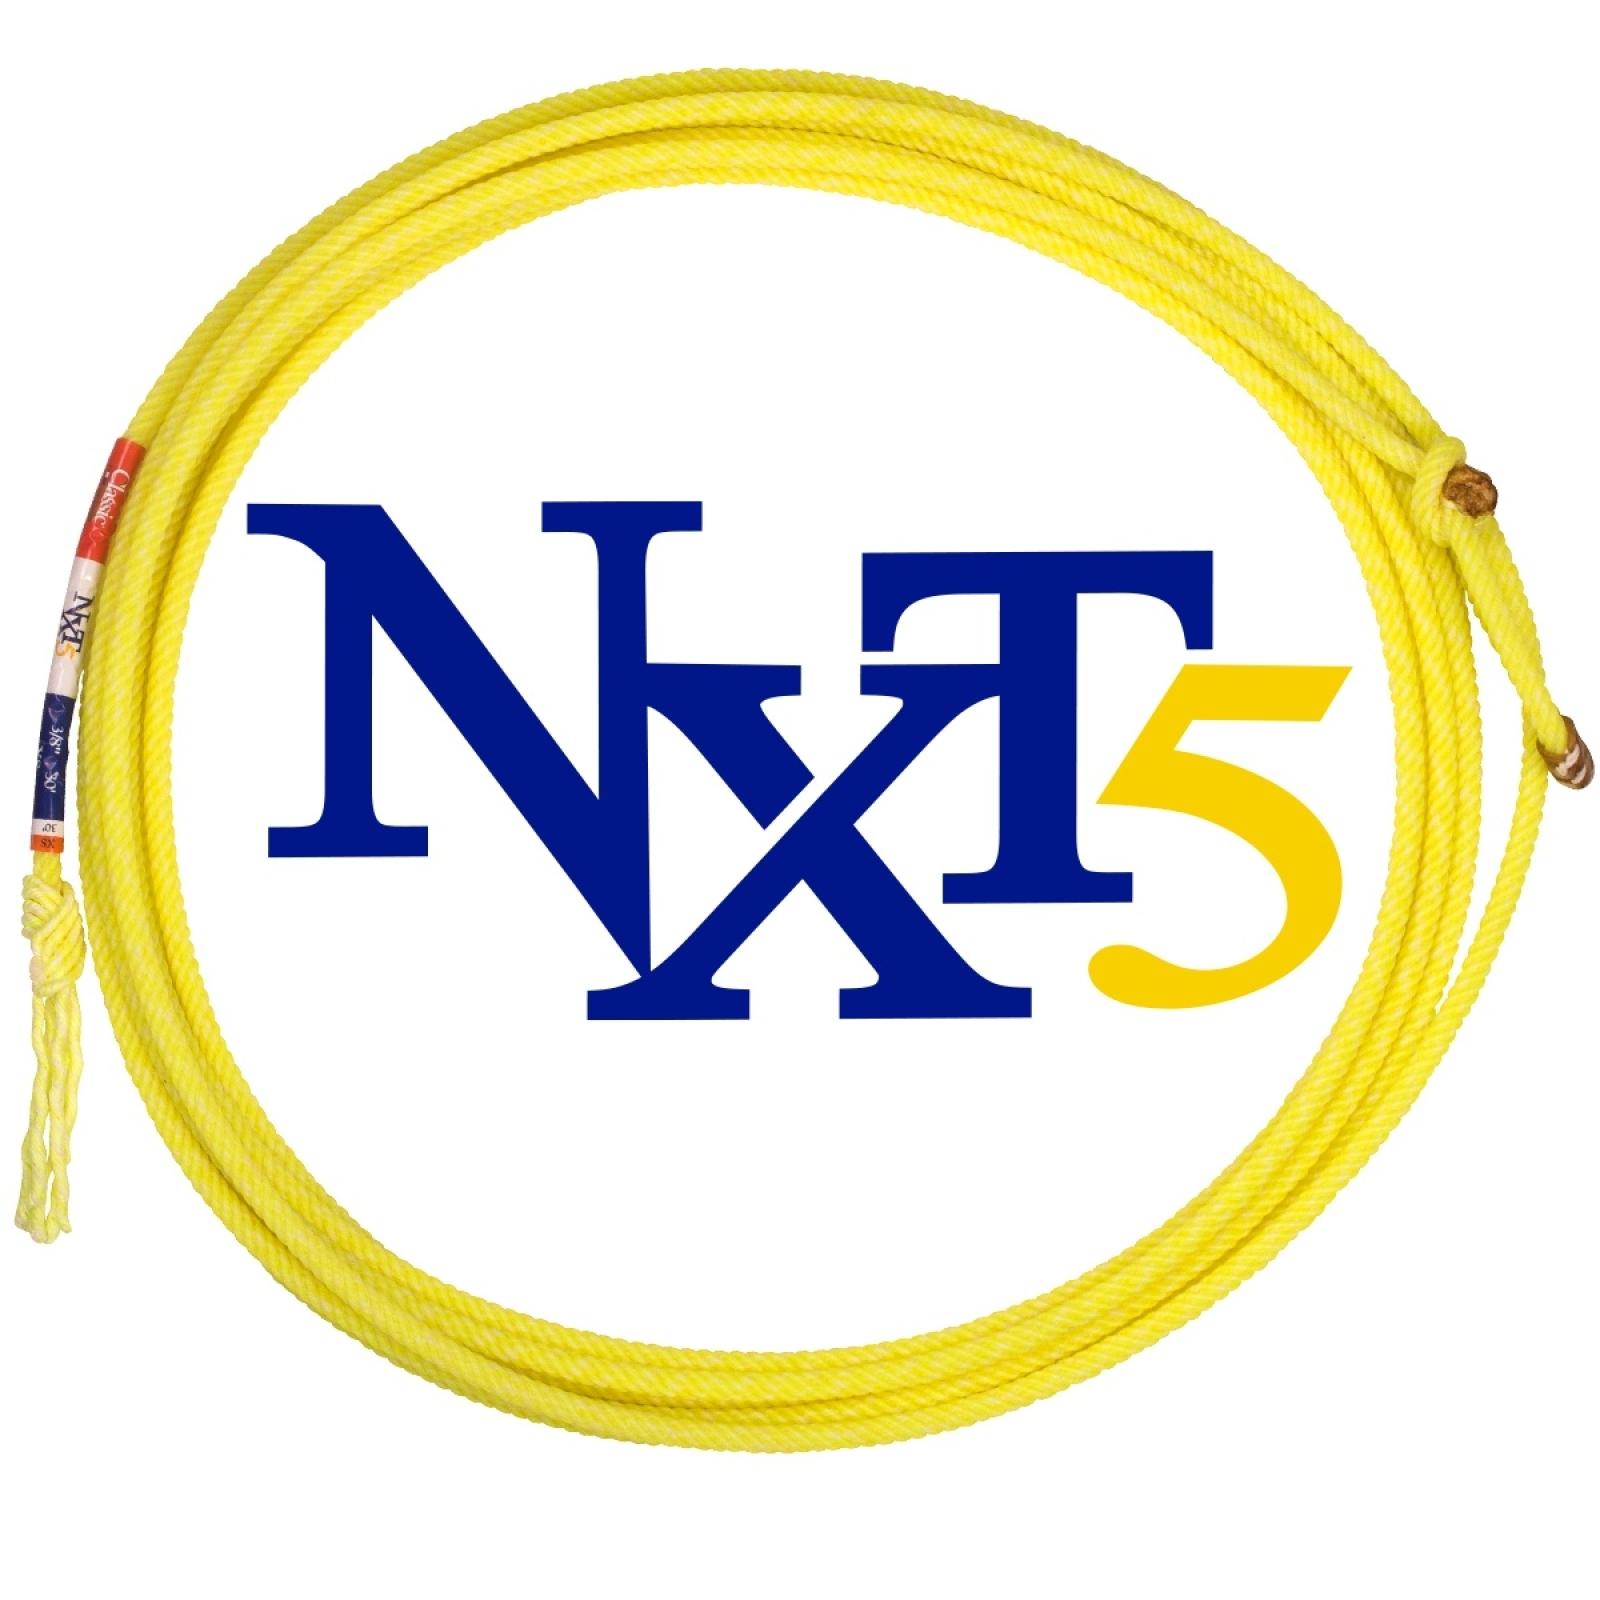 Classic NXT5 30' Head Rope 